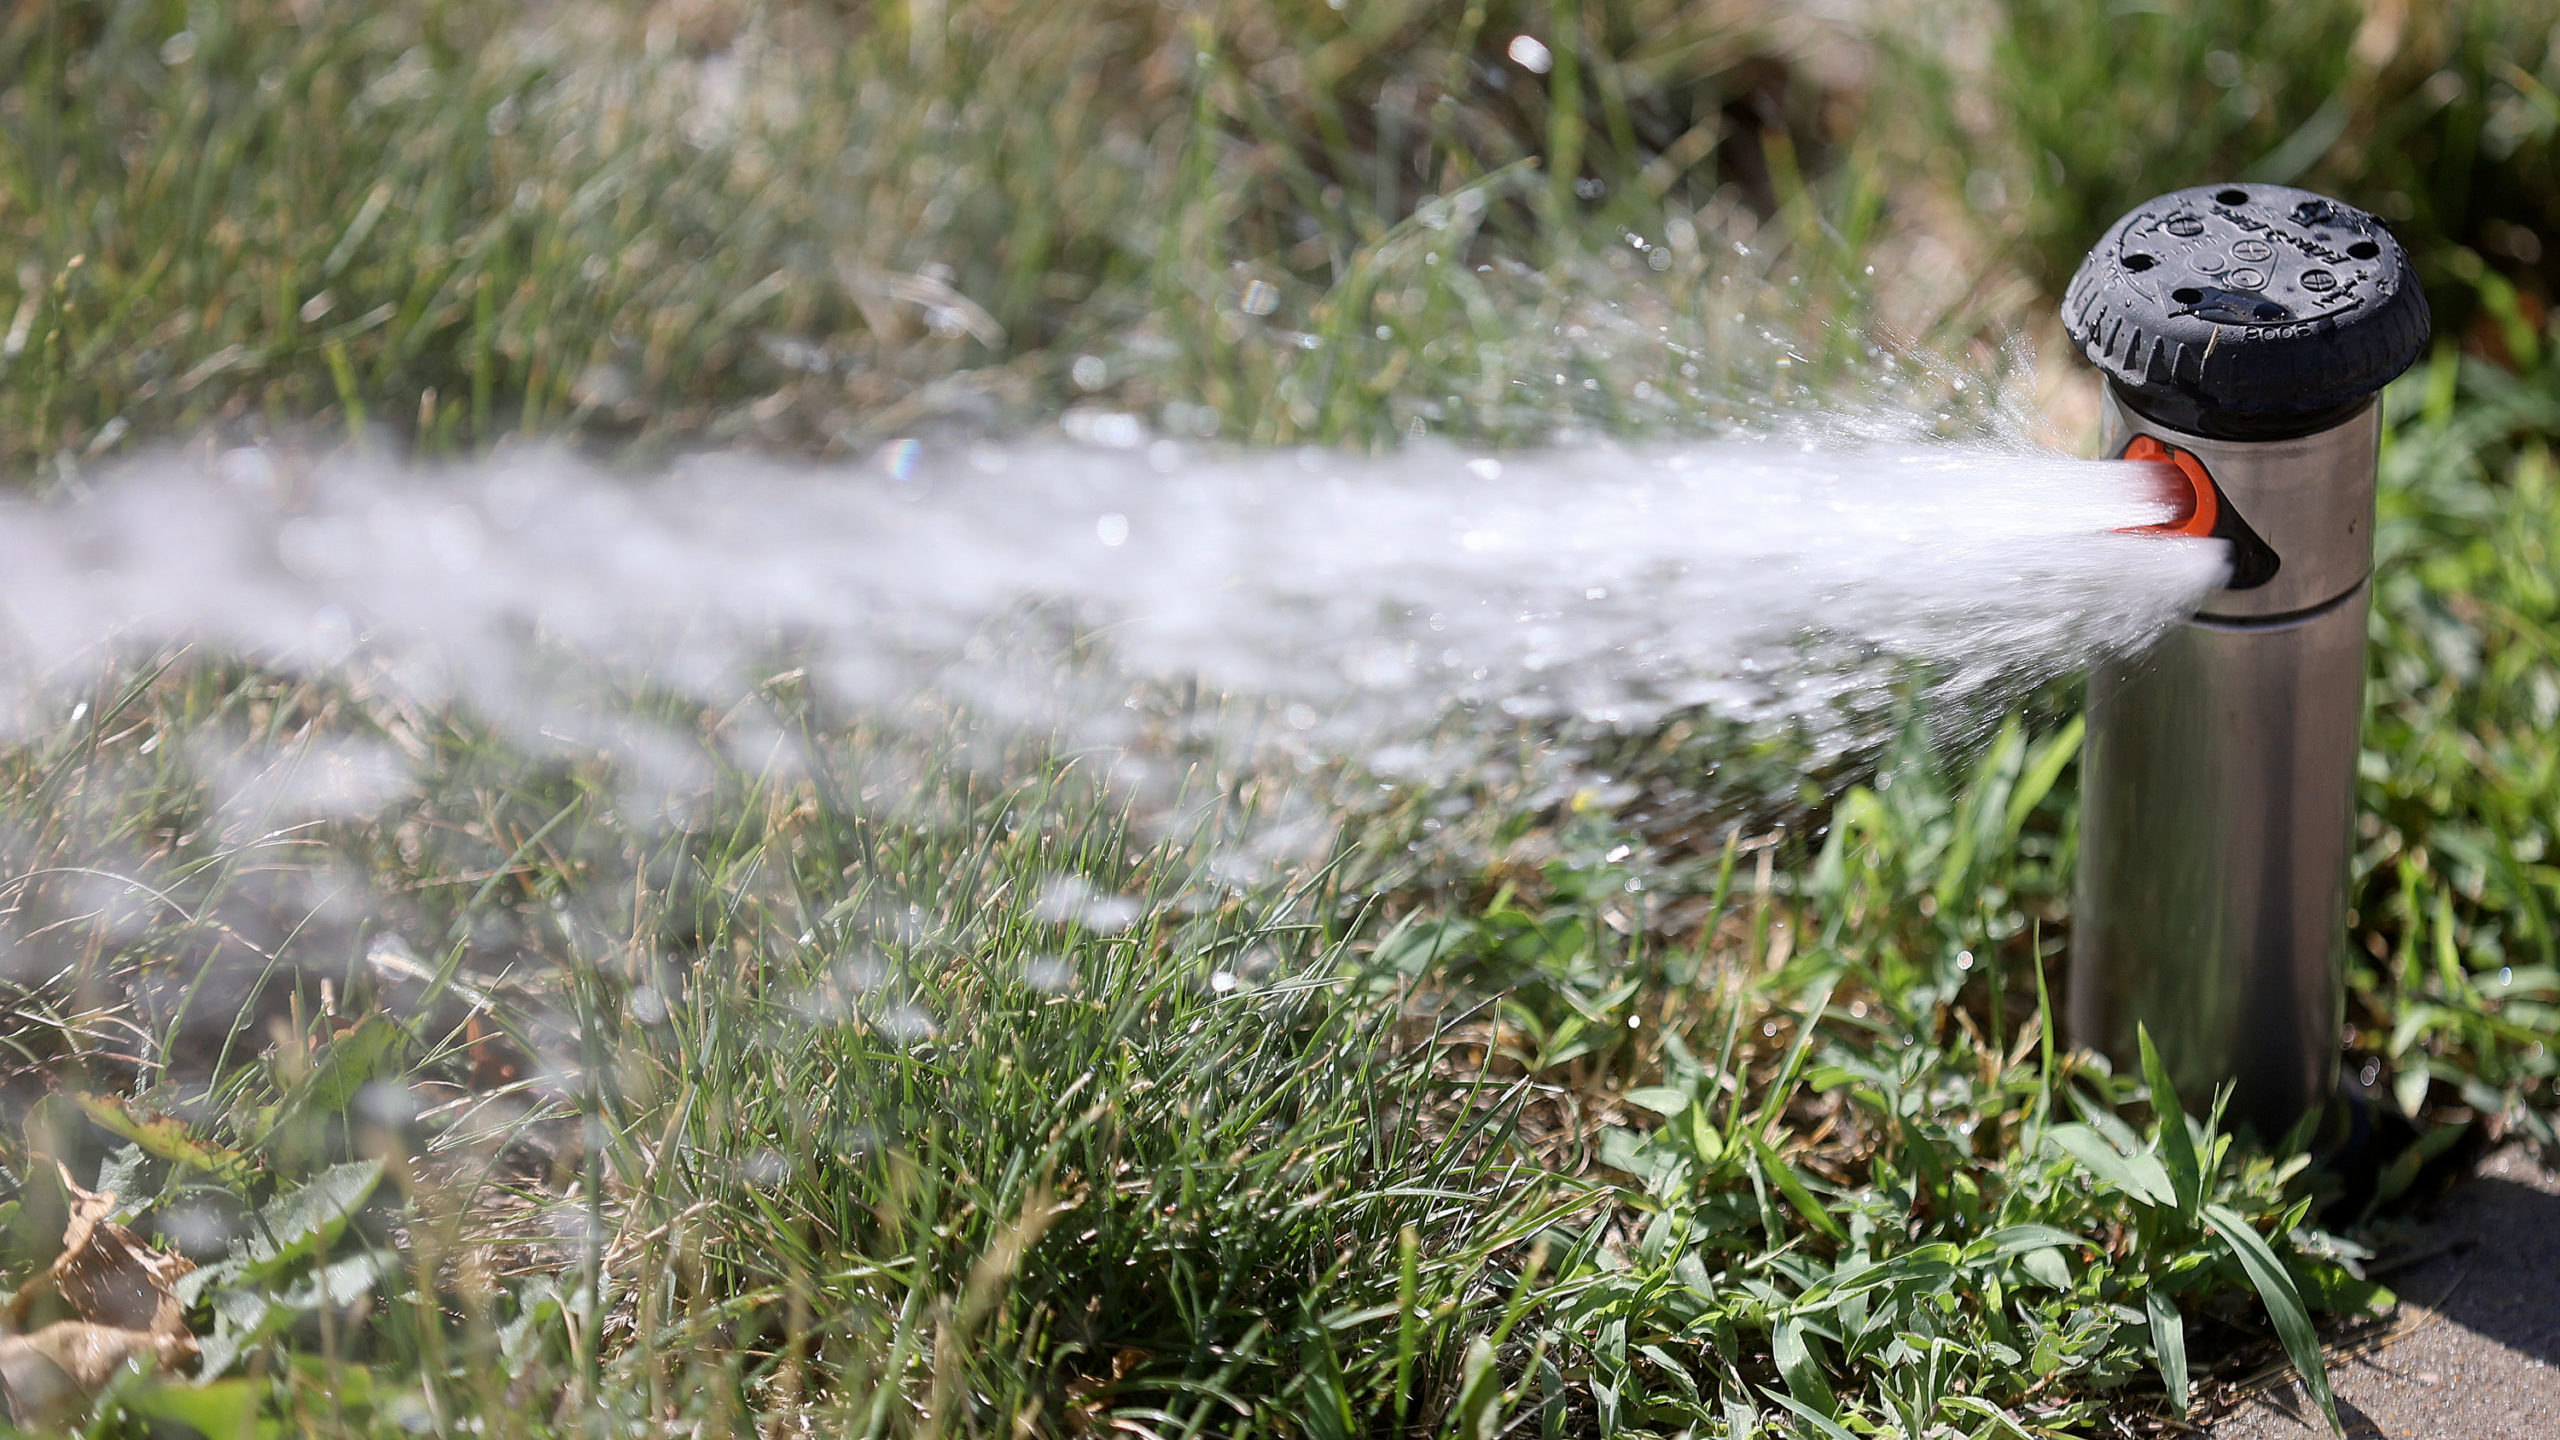 sprinkler is pictured. Secondary water is used for irrigation....